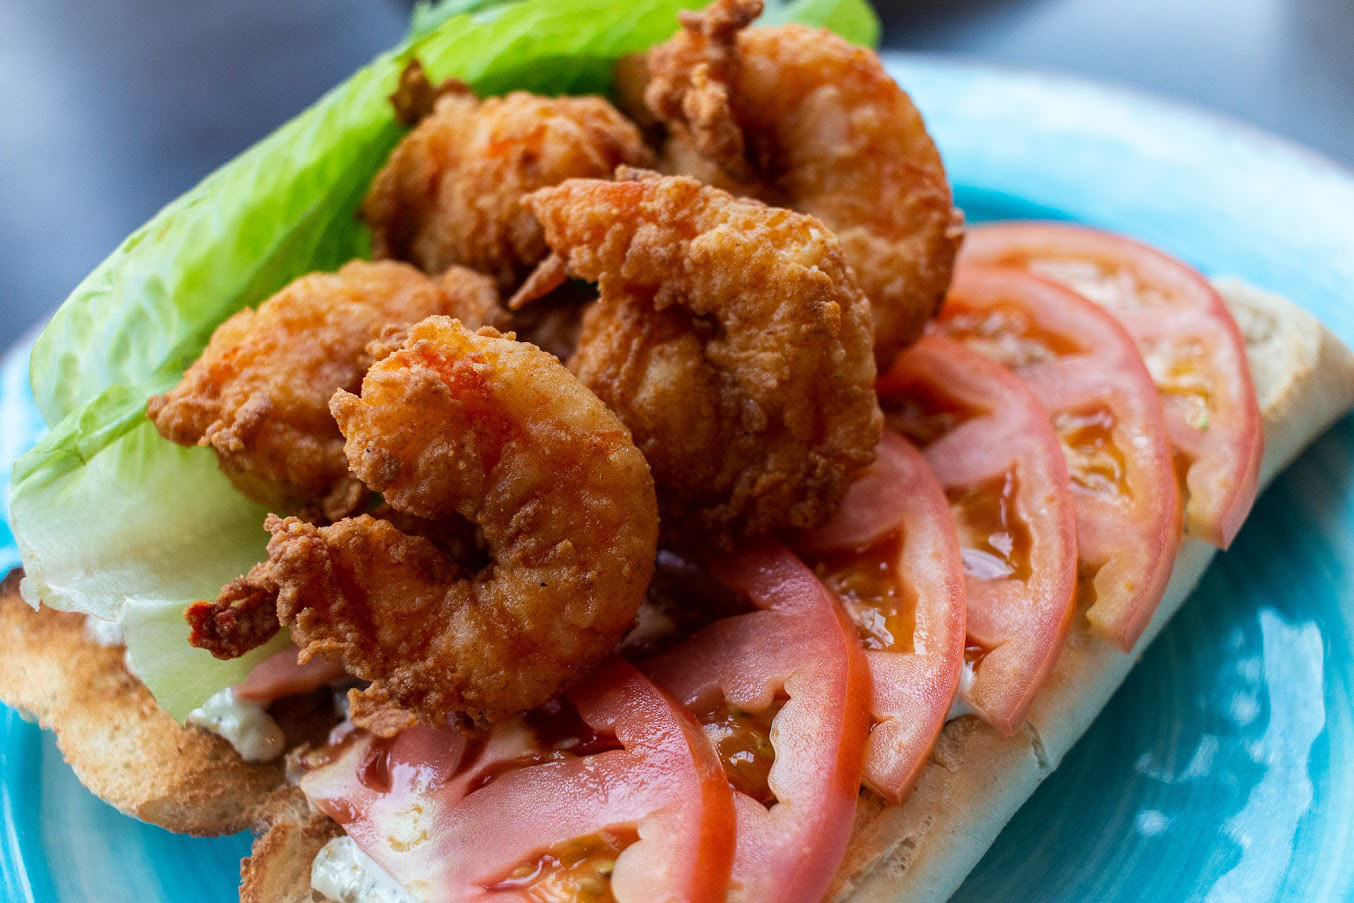 Fried shrimp Po' Boy sandwich, with lettuce, tomato and dressing